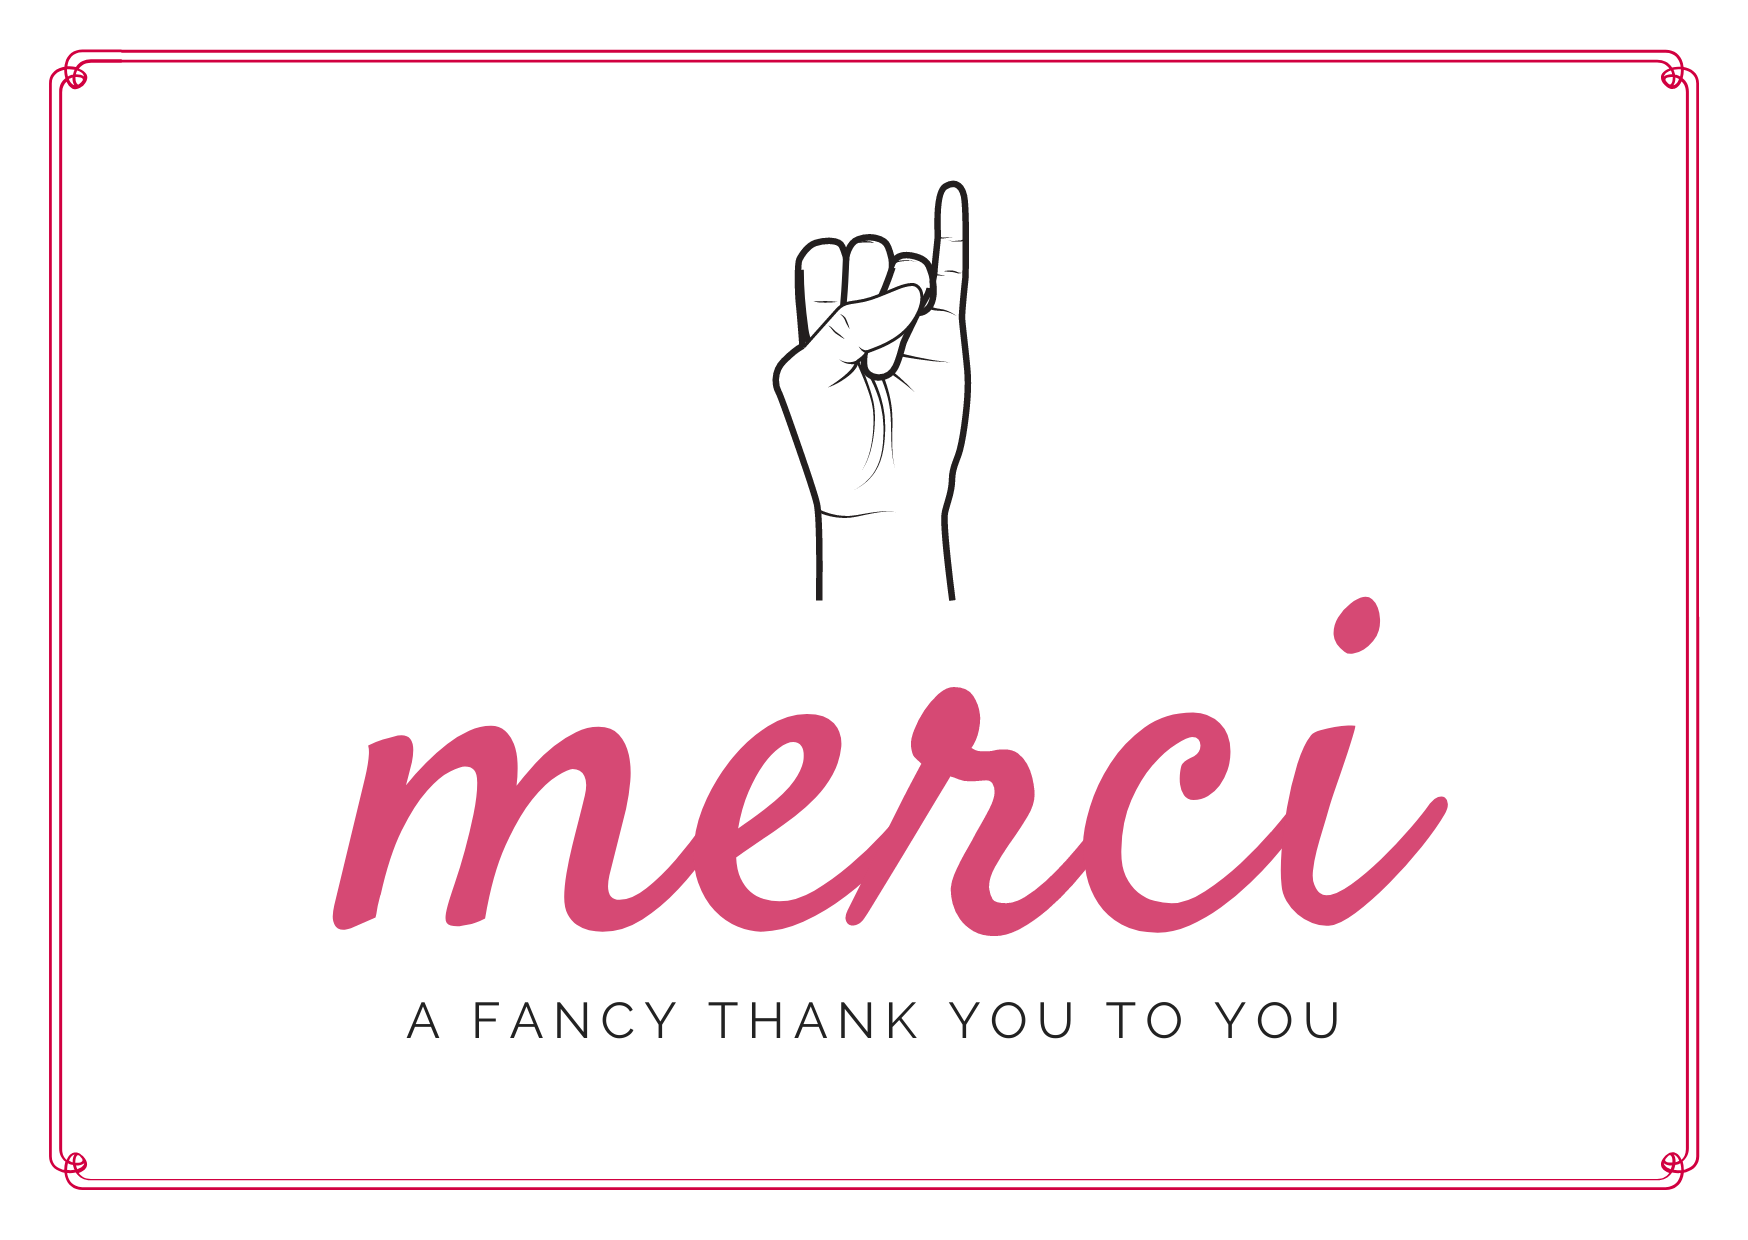 White seed paper greeting card saying "Merci, a fancy thank you to you" with sign language